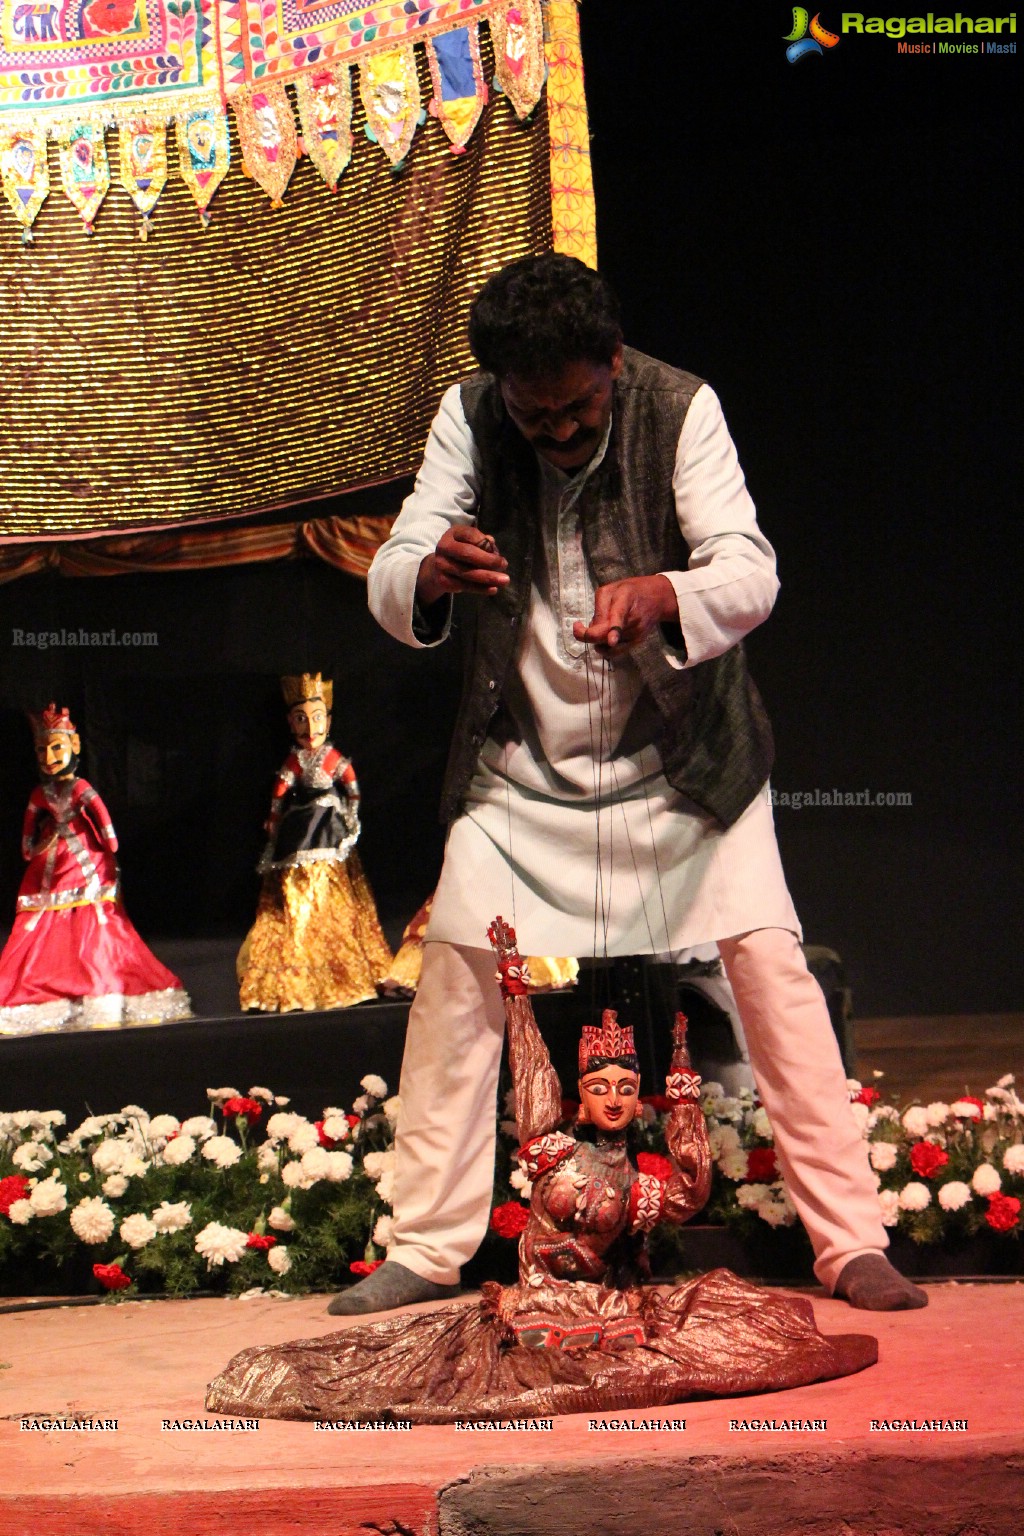 Puppetry Performance - A Workshop Kathputli Performance by Jagadish Bhatt and Troupe at Rock Heights, Hitec City, Hyderabad